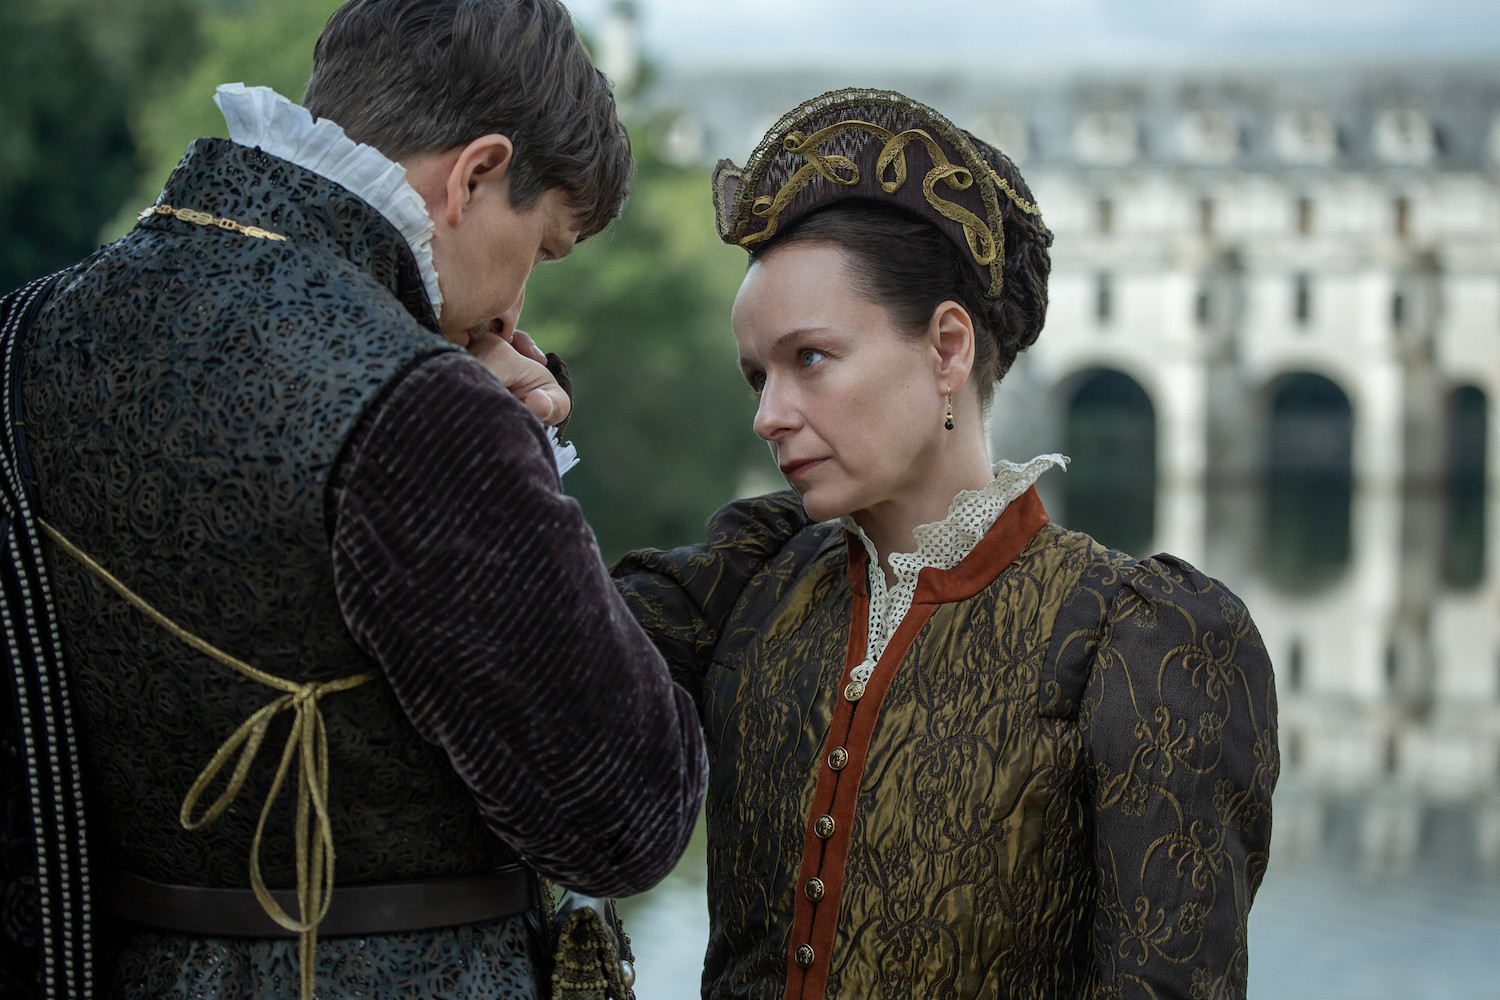 Picture shows: Henri (Lee Ingleby) kisses Catherine's (Samantha Morton) hand, with Chenonceaux reflected in the lake in the background.